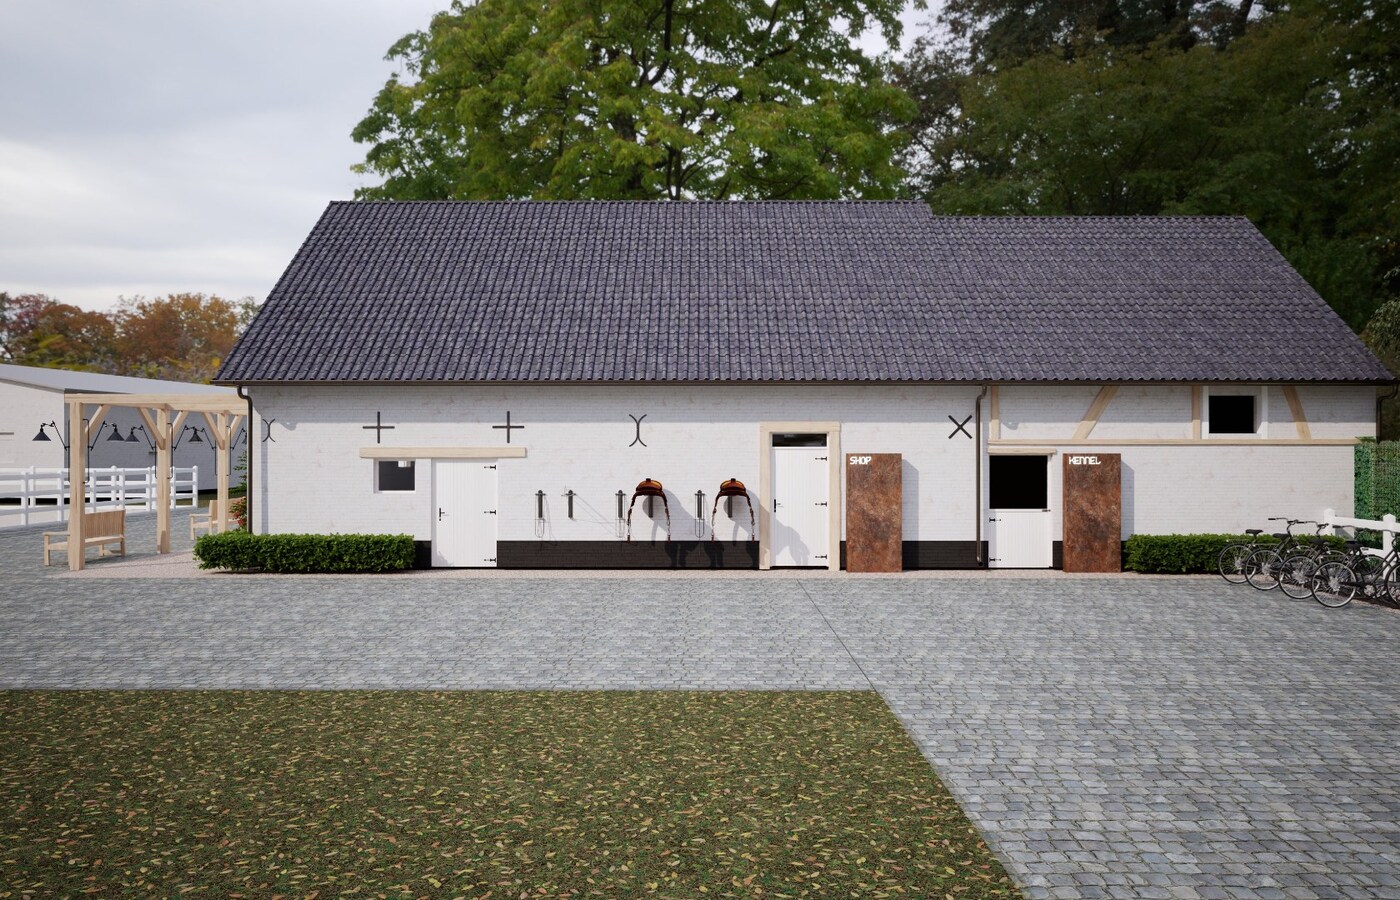 Equestrian center with great potential (and subsidies) on approximately 5.67 hectares in Heusden-Zolder. 